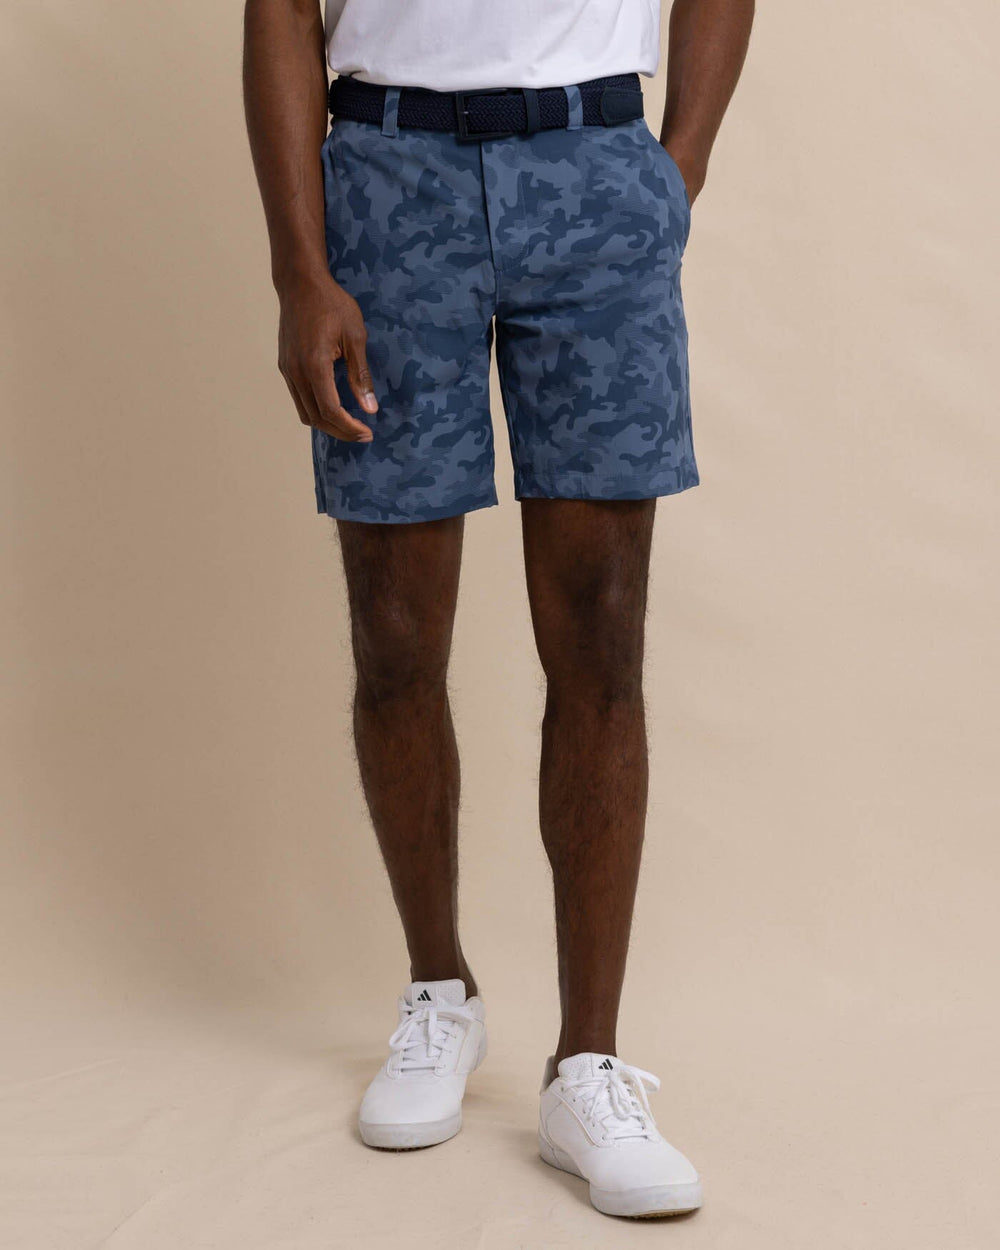 The front view of the Southern Tide brrr die Island Camo Printed Short by Southern Tide - Dark Seas